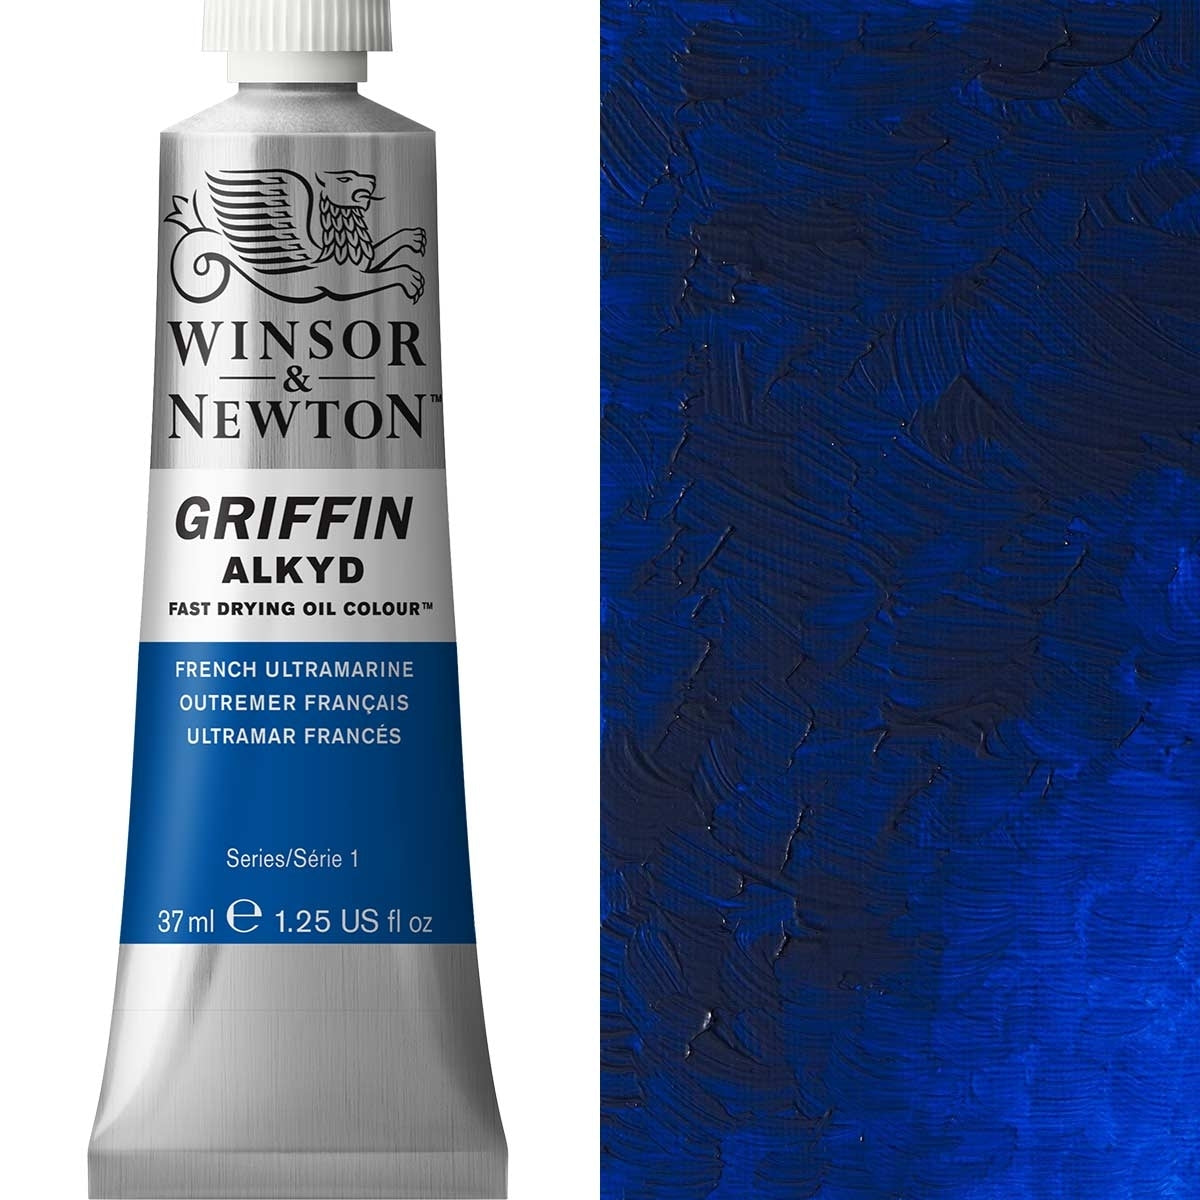 Winsor and Newton - Griffin ALKYD Oil Colour - 37ml - French Ultramarine